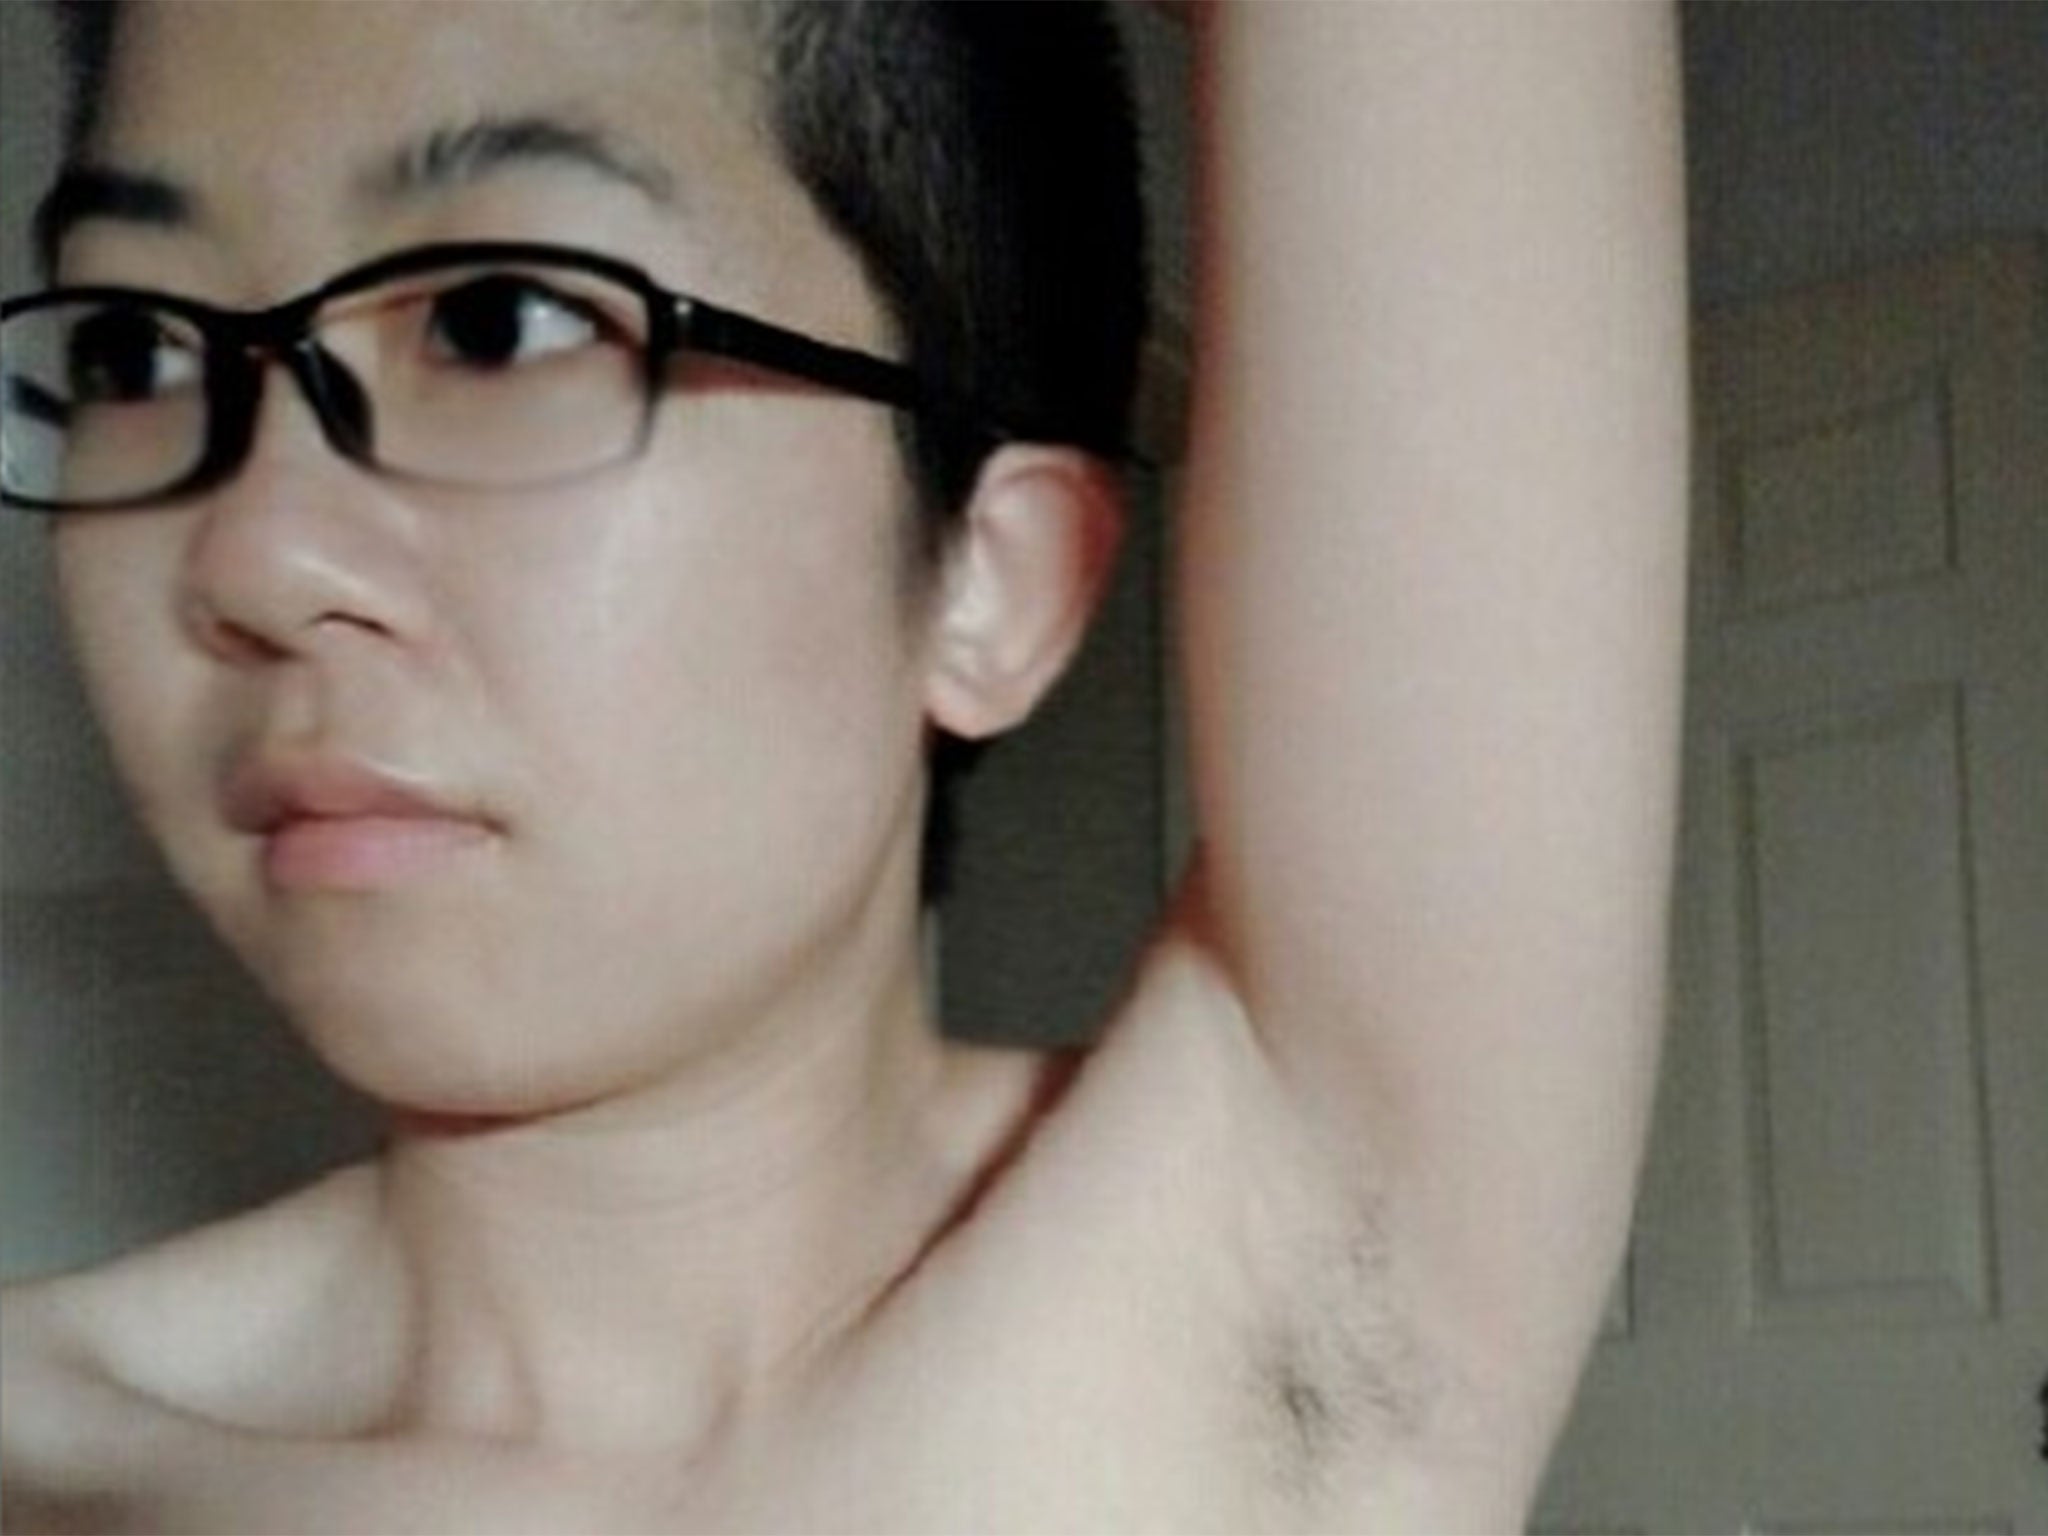 Chinese Feminists Are Sharing Photos Of Their Armpit Hair As Part Of A Contest Designed To Question Standards Of Beauty The Independent The Independent